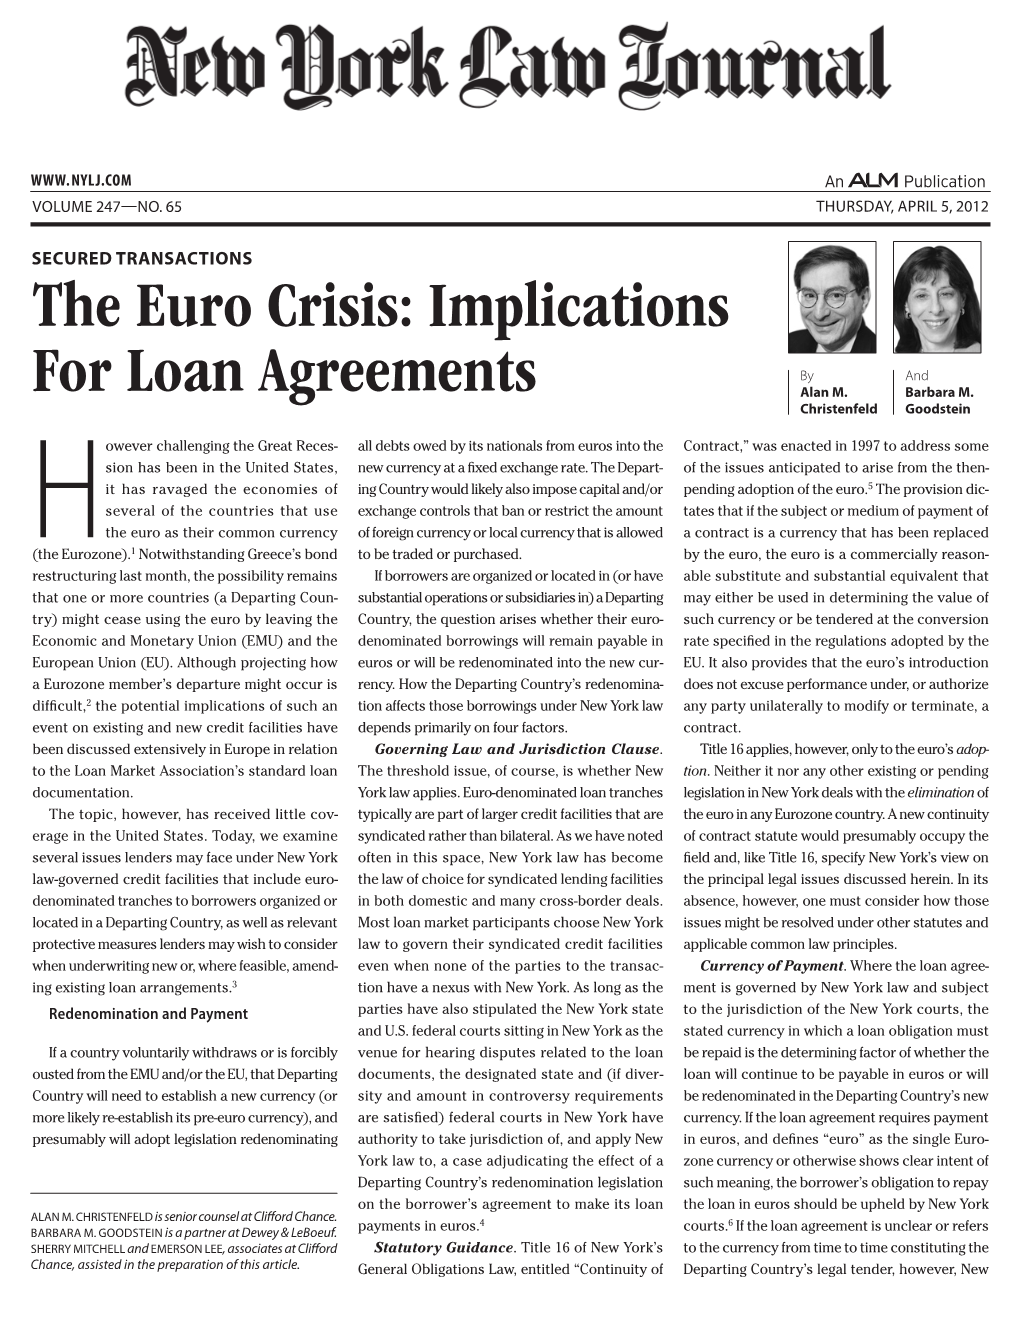 The Euro Crisis: Implications for Loan Agreements